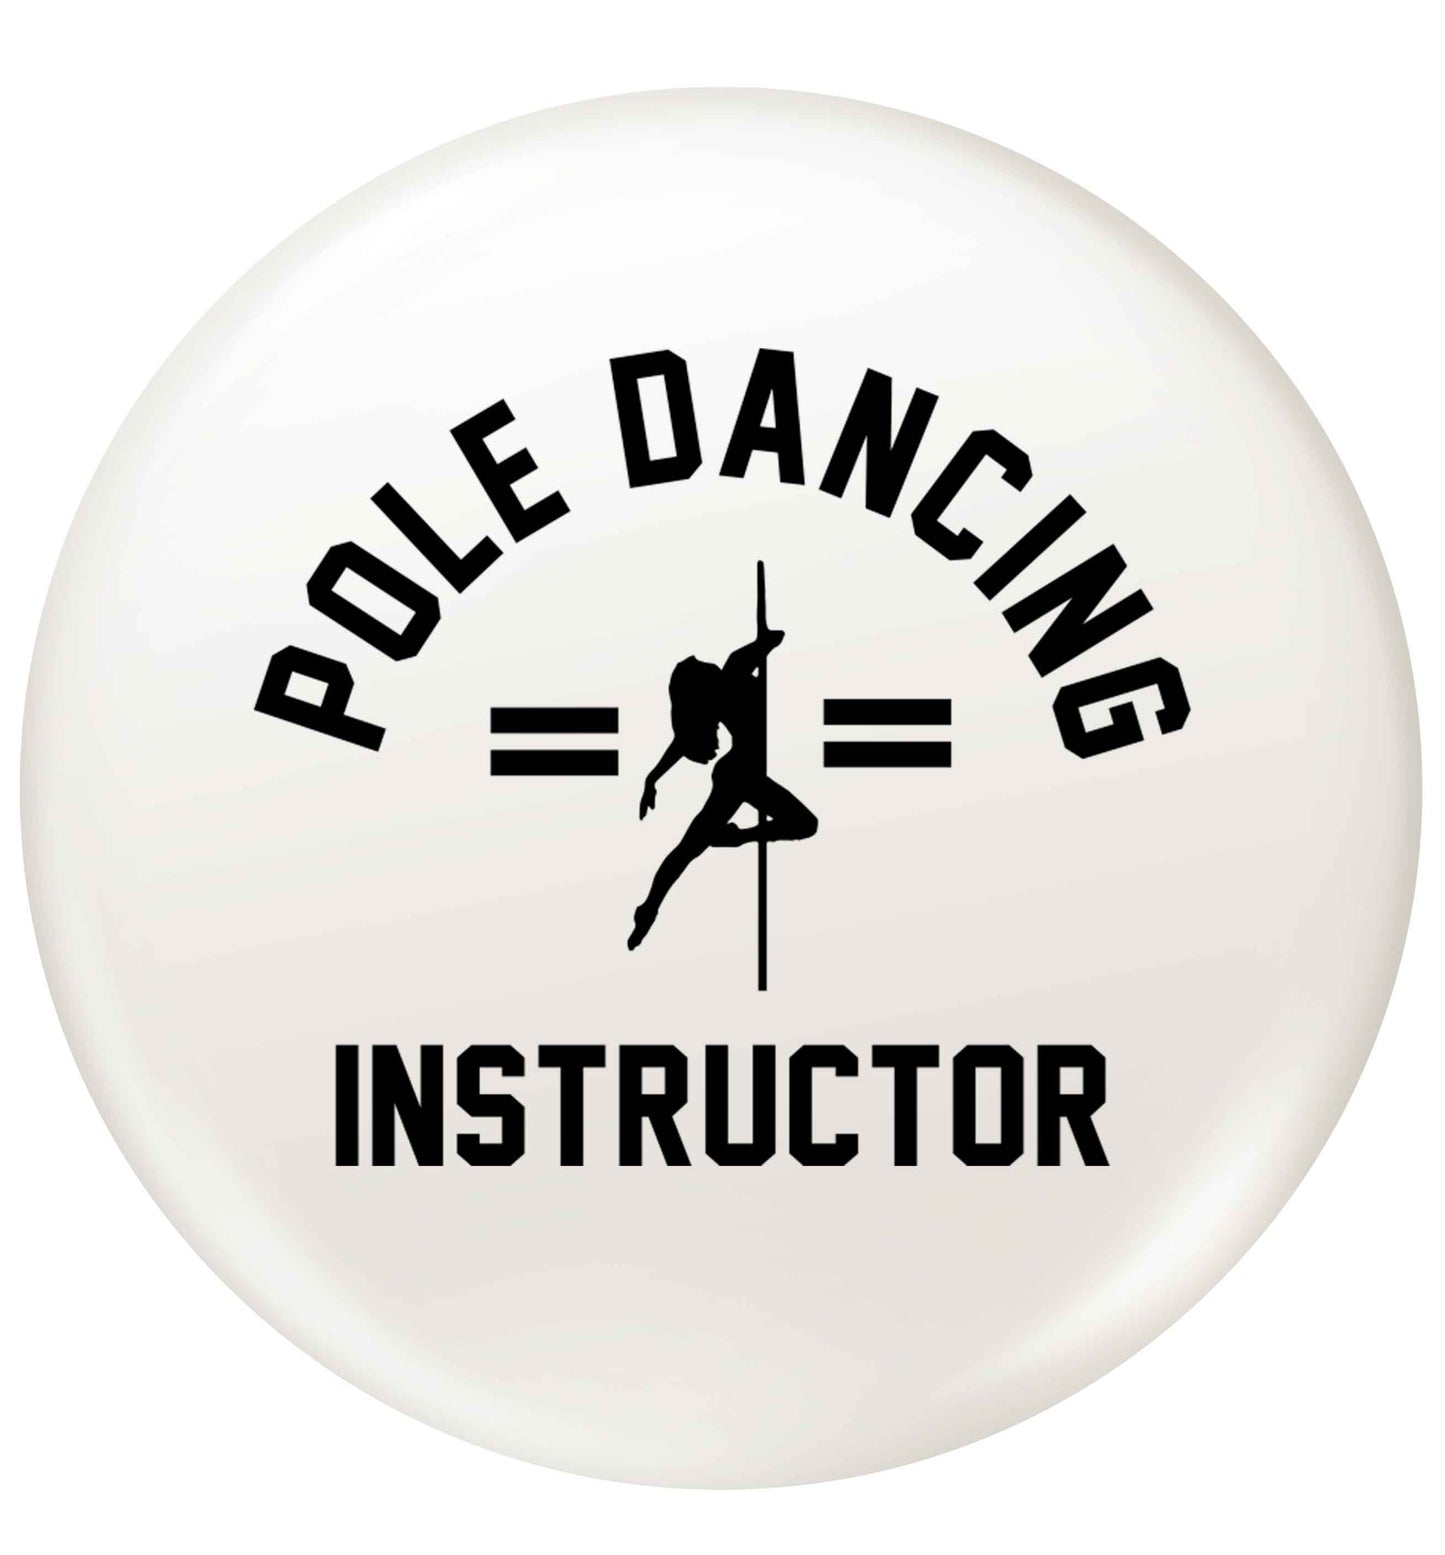 Pole dancing instructor small 25mm Pin badge